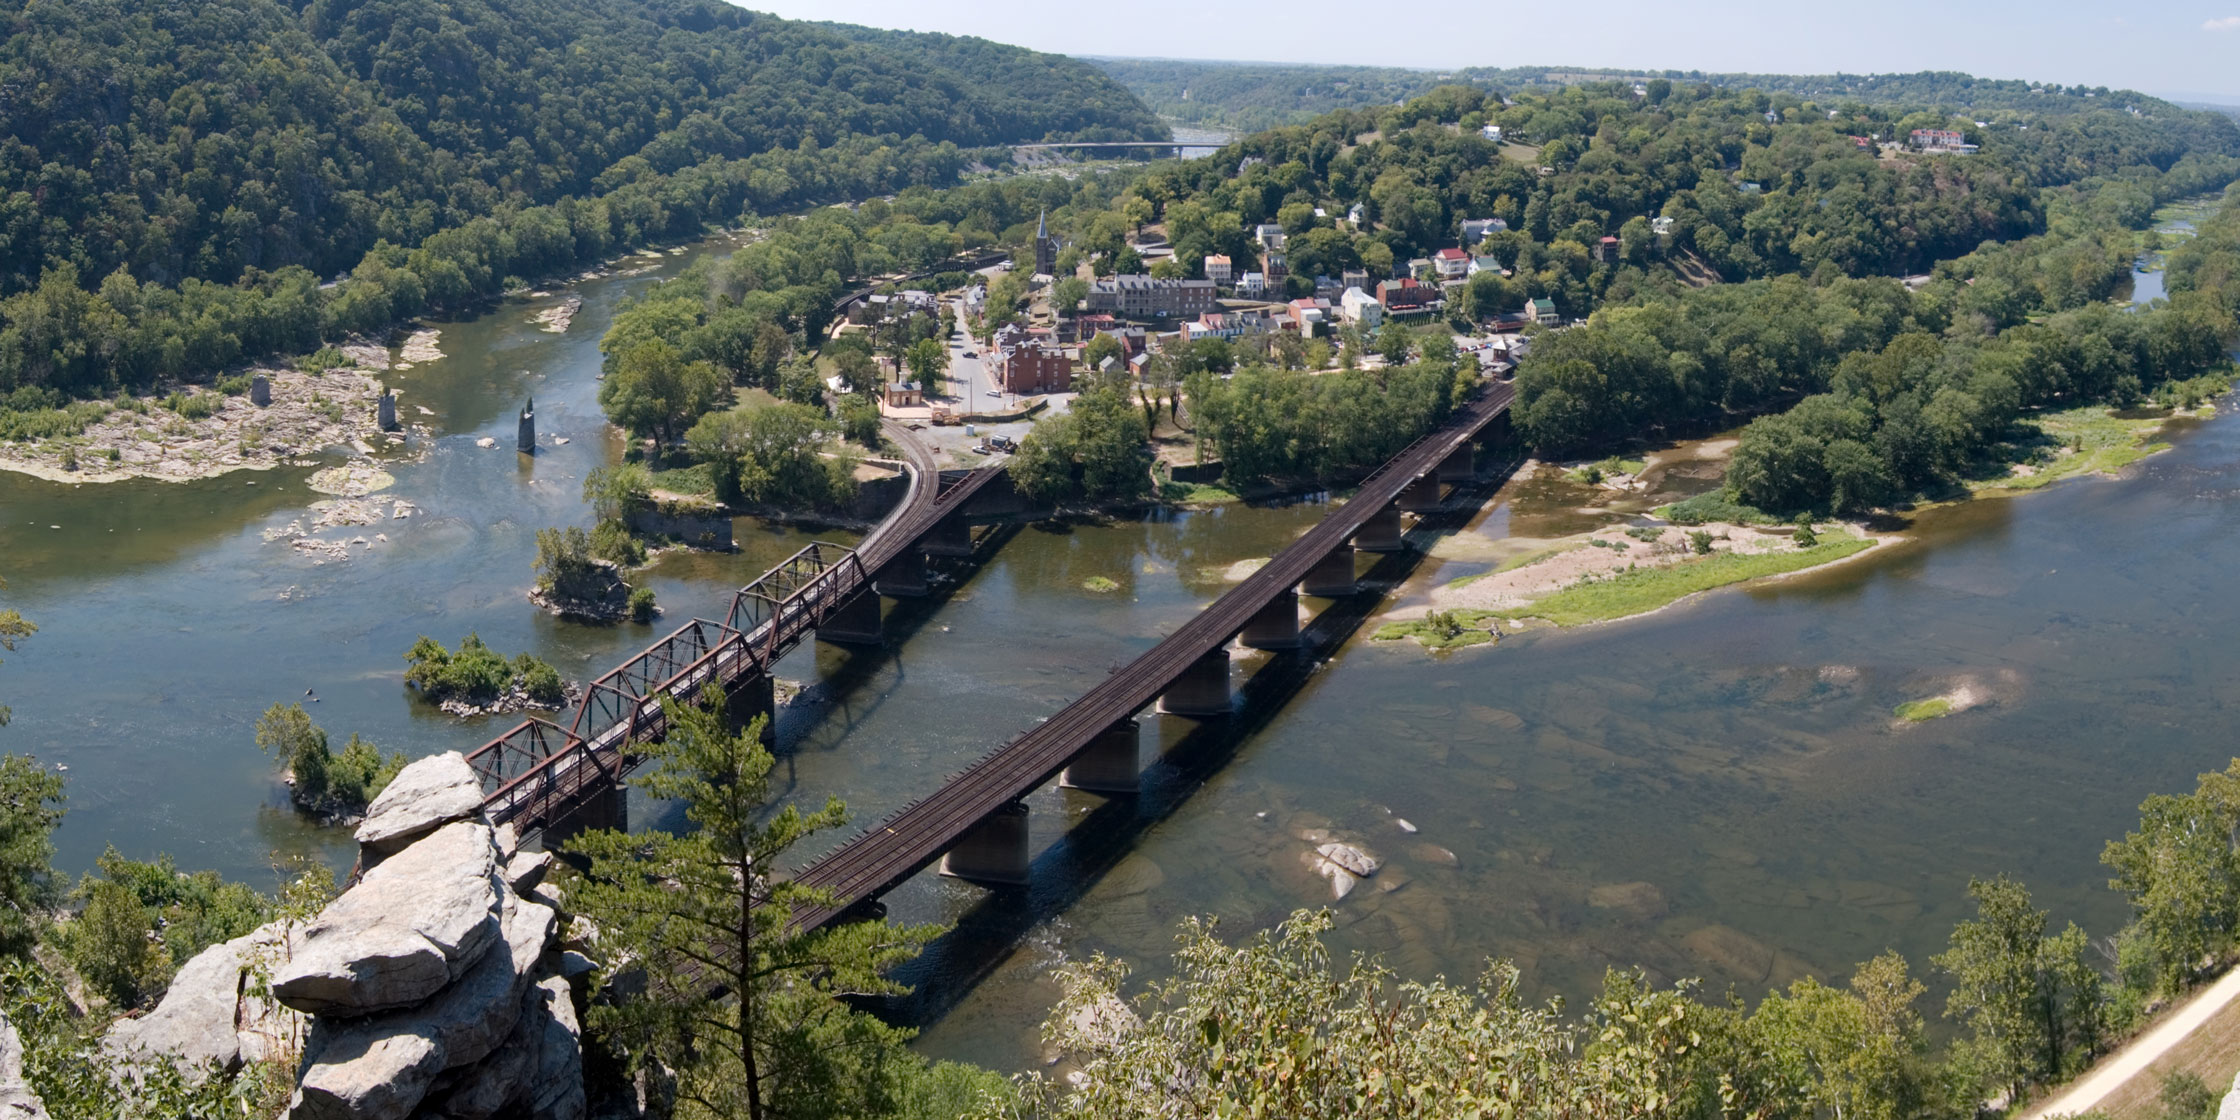 The view of Harpers Ferry from Maryland Heights